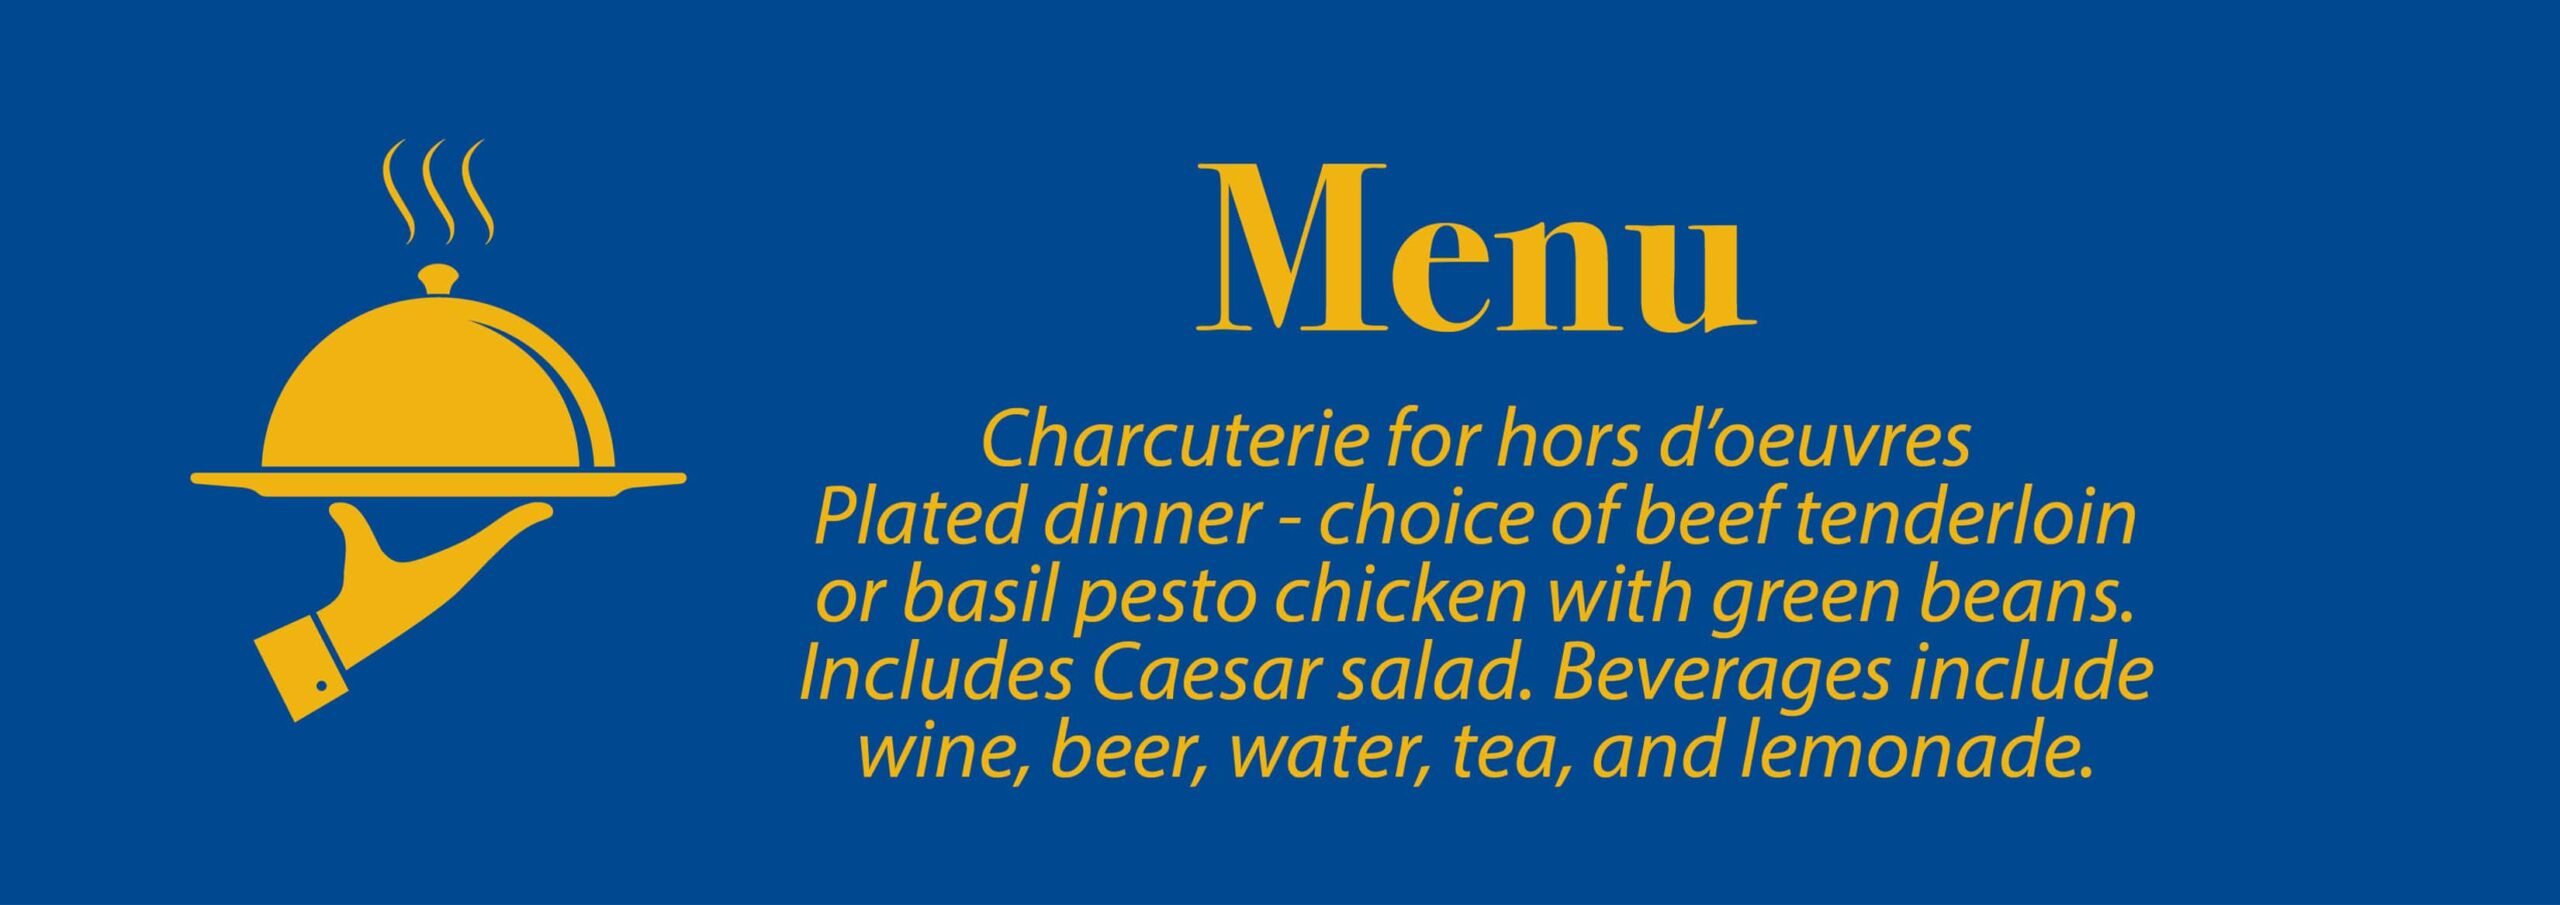 Food Menu: Charcuterie: charcuterie for hors d oeuvres/ appetizer and plated dinner including Caesar salad with choice of beef tenderloin or basil pesto chicken with green beans. There will be water / tea / lemonade and wine / beer.